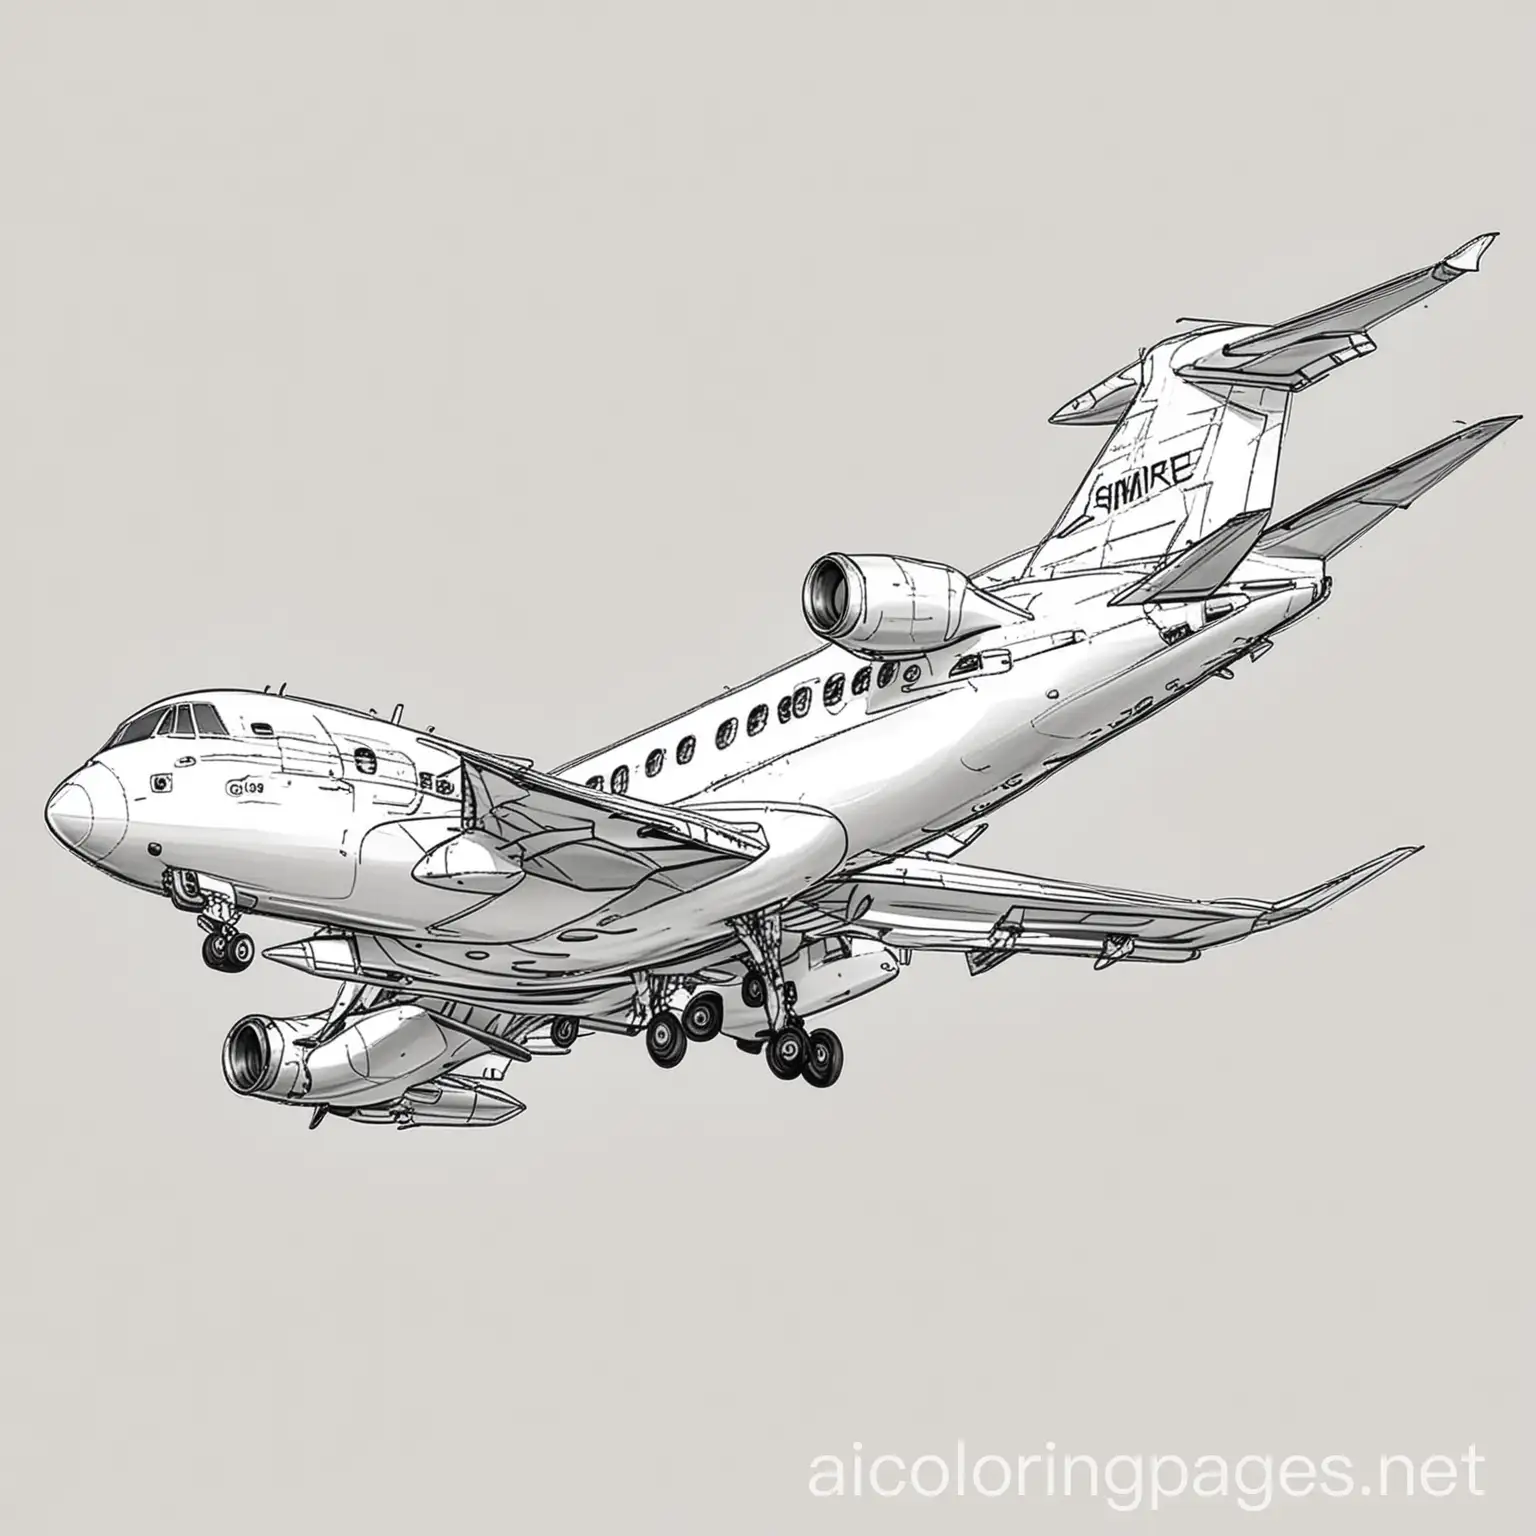 airplain, Coloring Page, black and white, line art, white background, Simplicity, Ample White Space